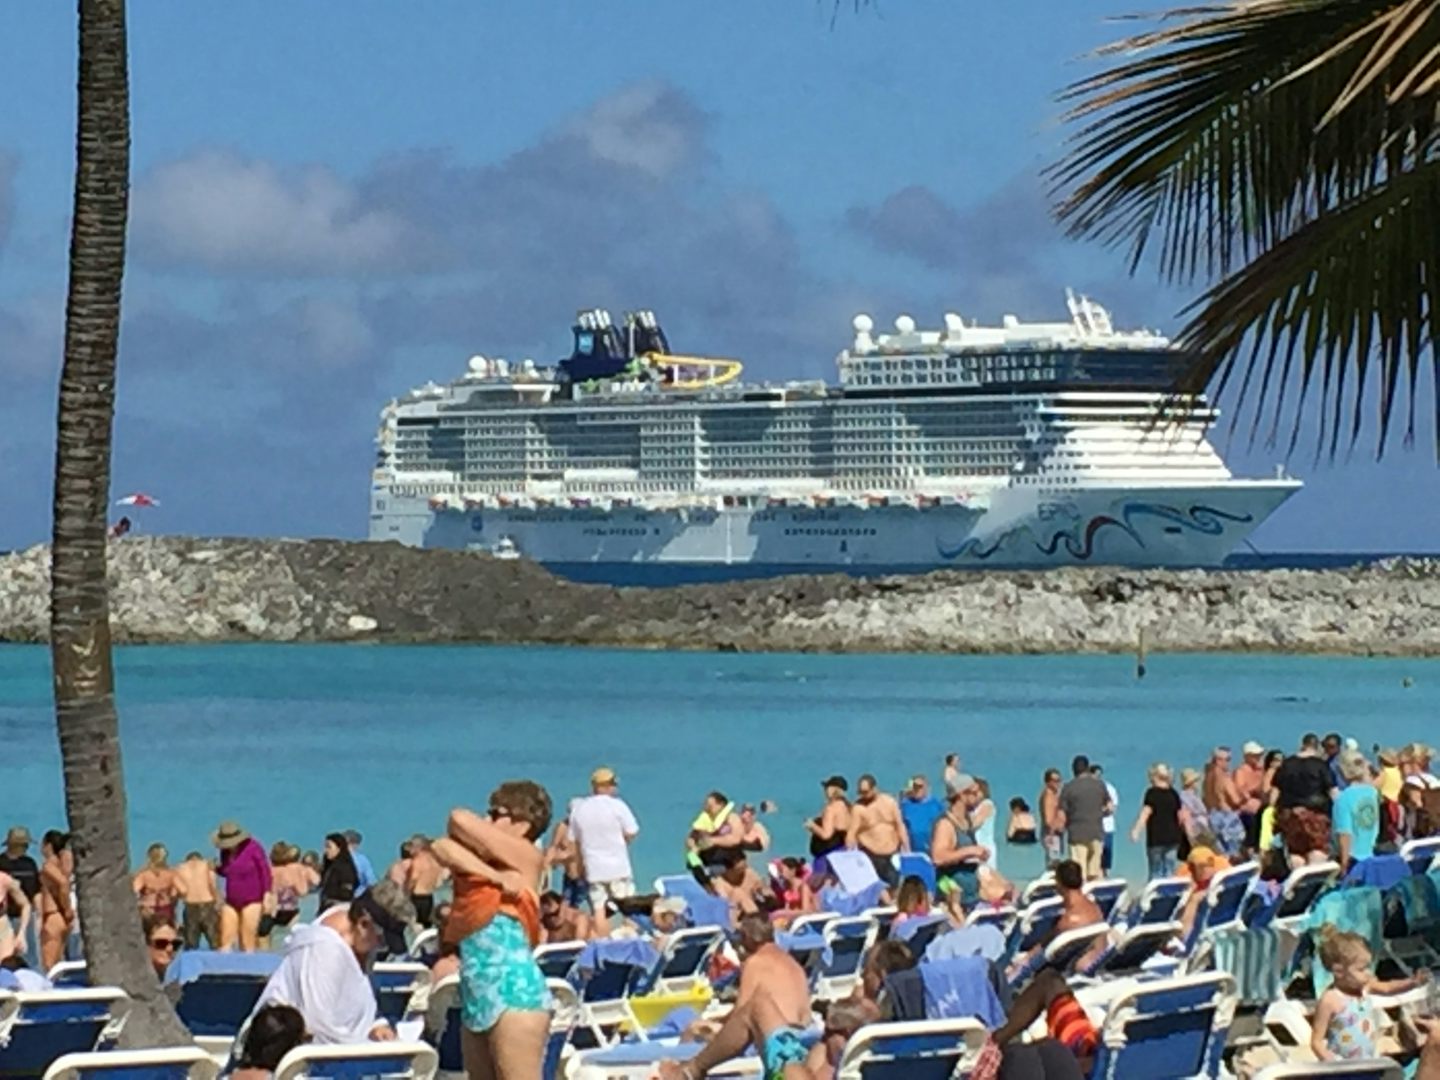 The Epic anchored at GREAT Stirrup Cay